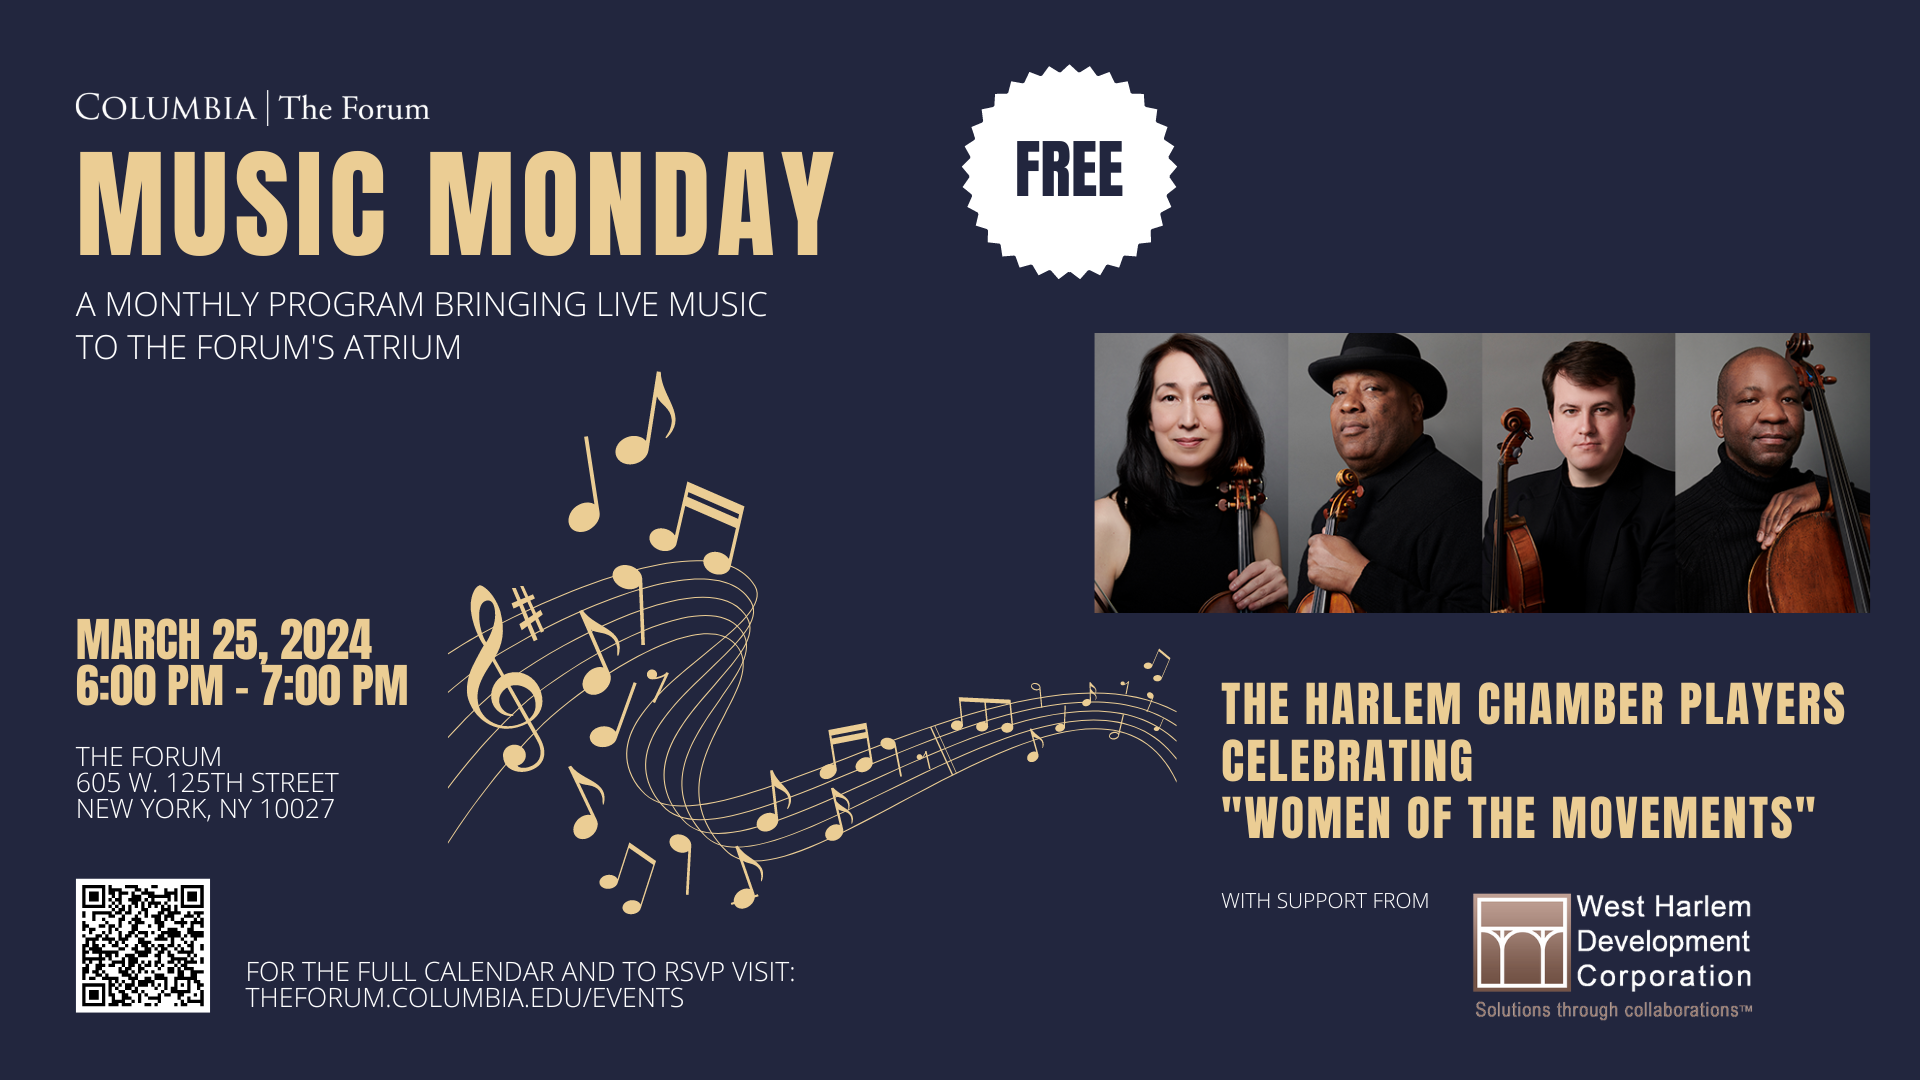 Music Monday Flyer promoting Women of the Movements concert on March 25, 2024